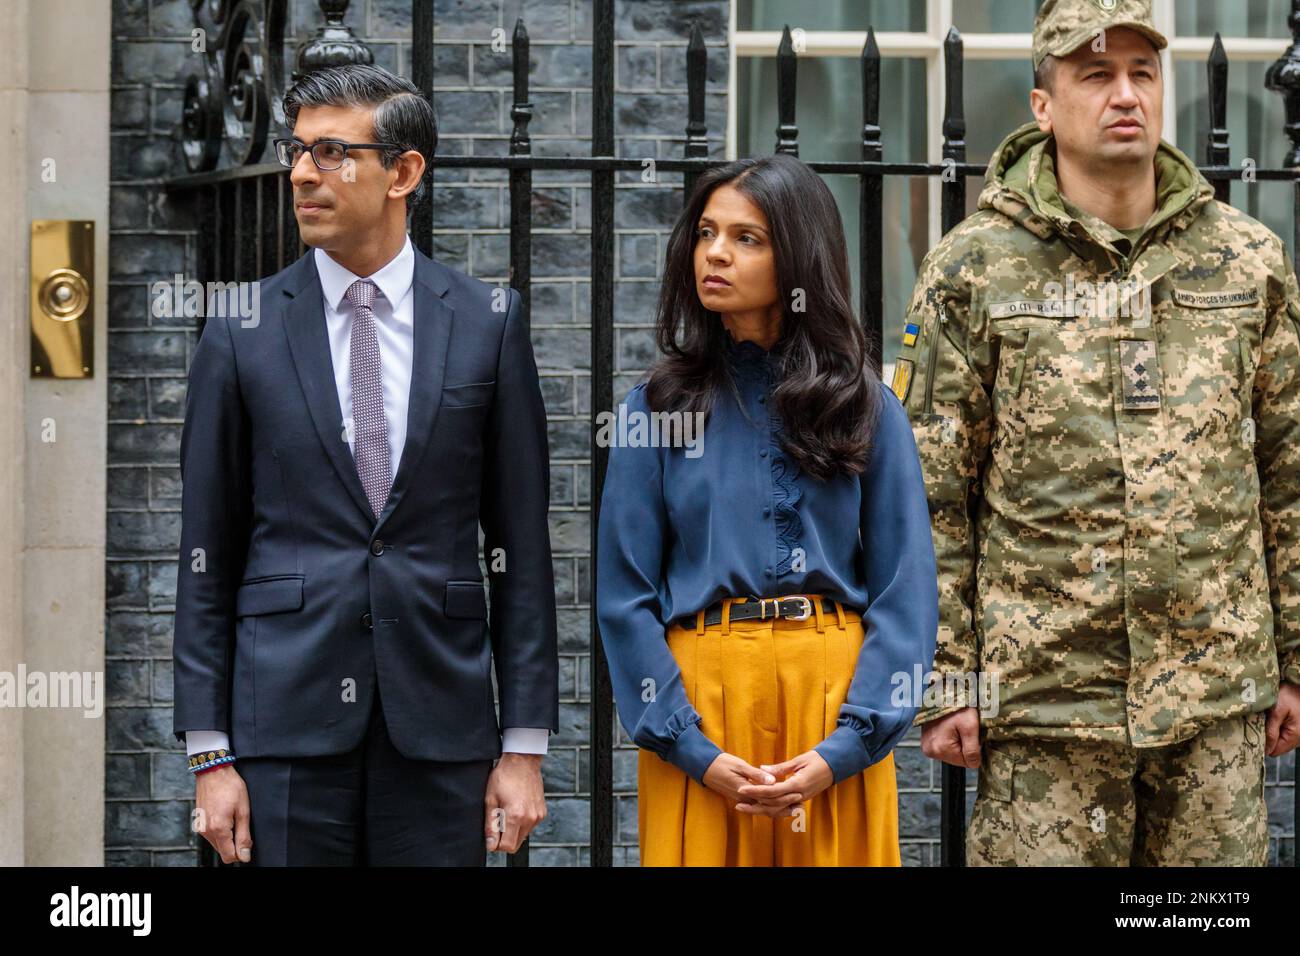 Downing Street, London, UK. 24th February 2023.  British Prime Minister, Rishi Sunak and his wife welcome Ukrainian Ambassador to the UK, Vadym Prystaiko,his wife and son, members of the Ukrainian Armed Forces and representatives from each Interflex nation to Downing Street, to observe a minute’s silence to mark the one-year anniversary of the full-scale Russian invasion of Ukraine. Photo by Amanda Rose/Alamy Live News Stock Photo